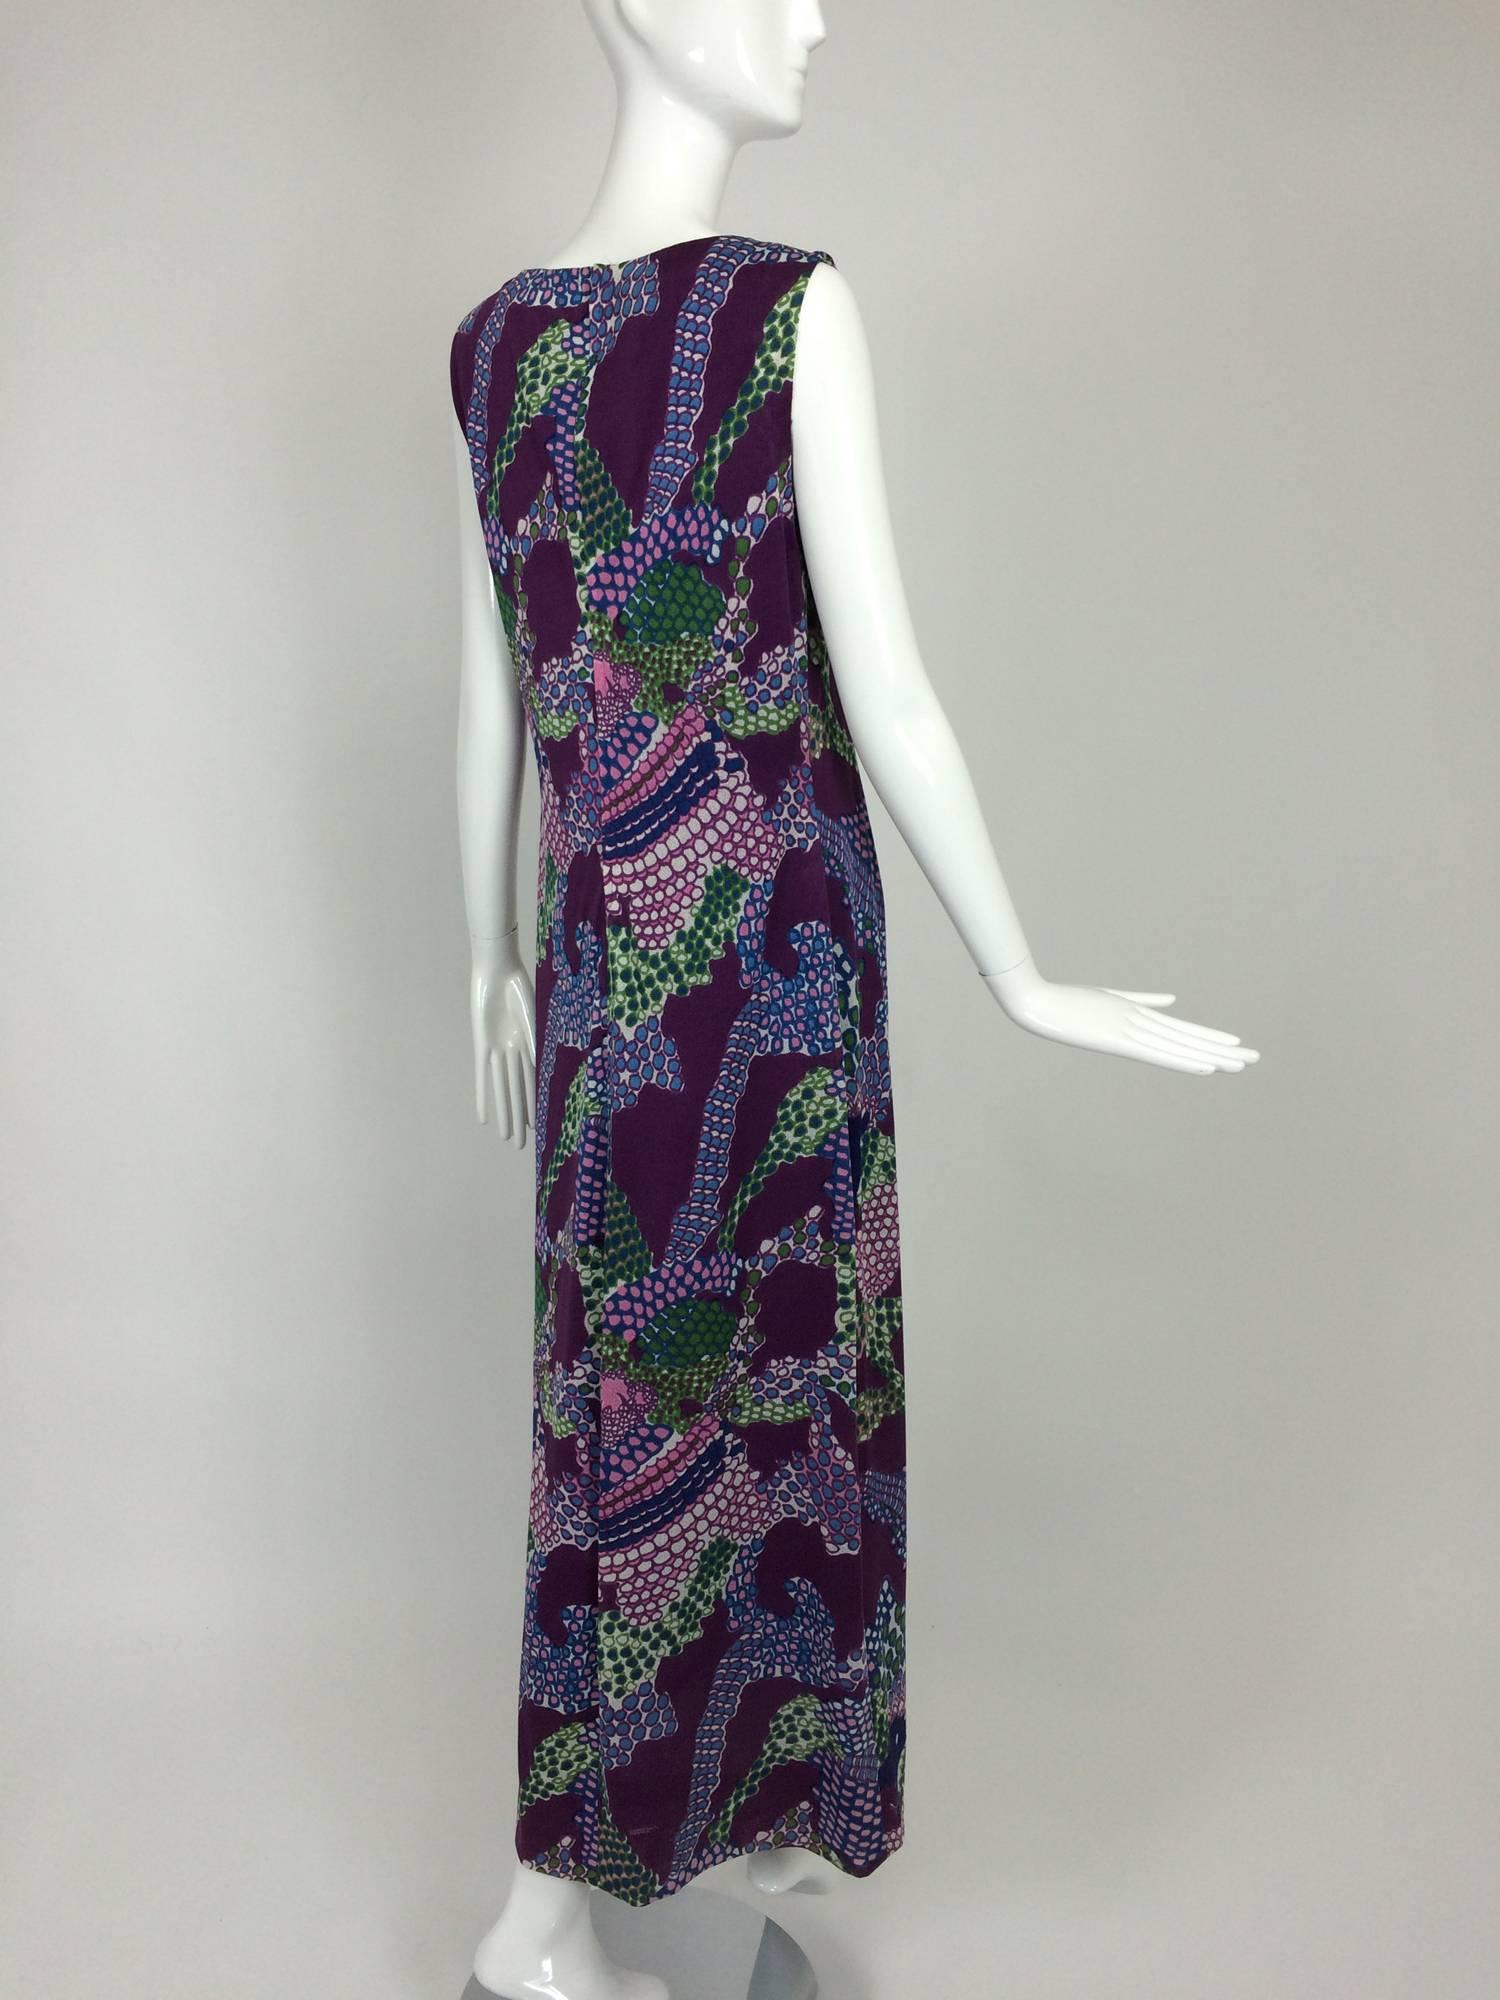 Pierre Balmain Les Tricots Sleeveless V neck maxi dress in a modern (60s) jersey print...Sleeveless, V neck dress with a deep side vent is fully lined...Fits a Medium

In excellent wearable condition... All our clothing is dry cleaned and